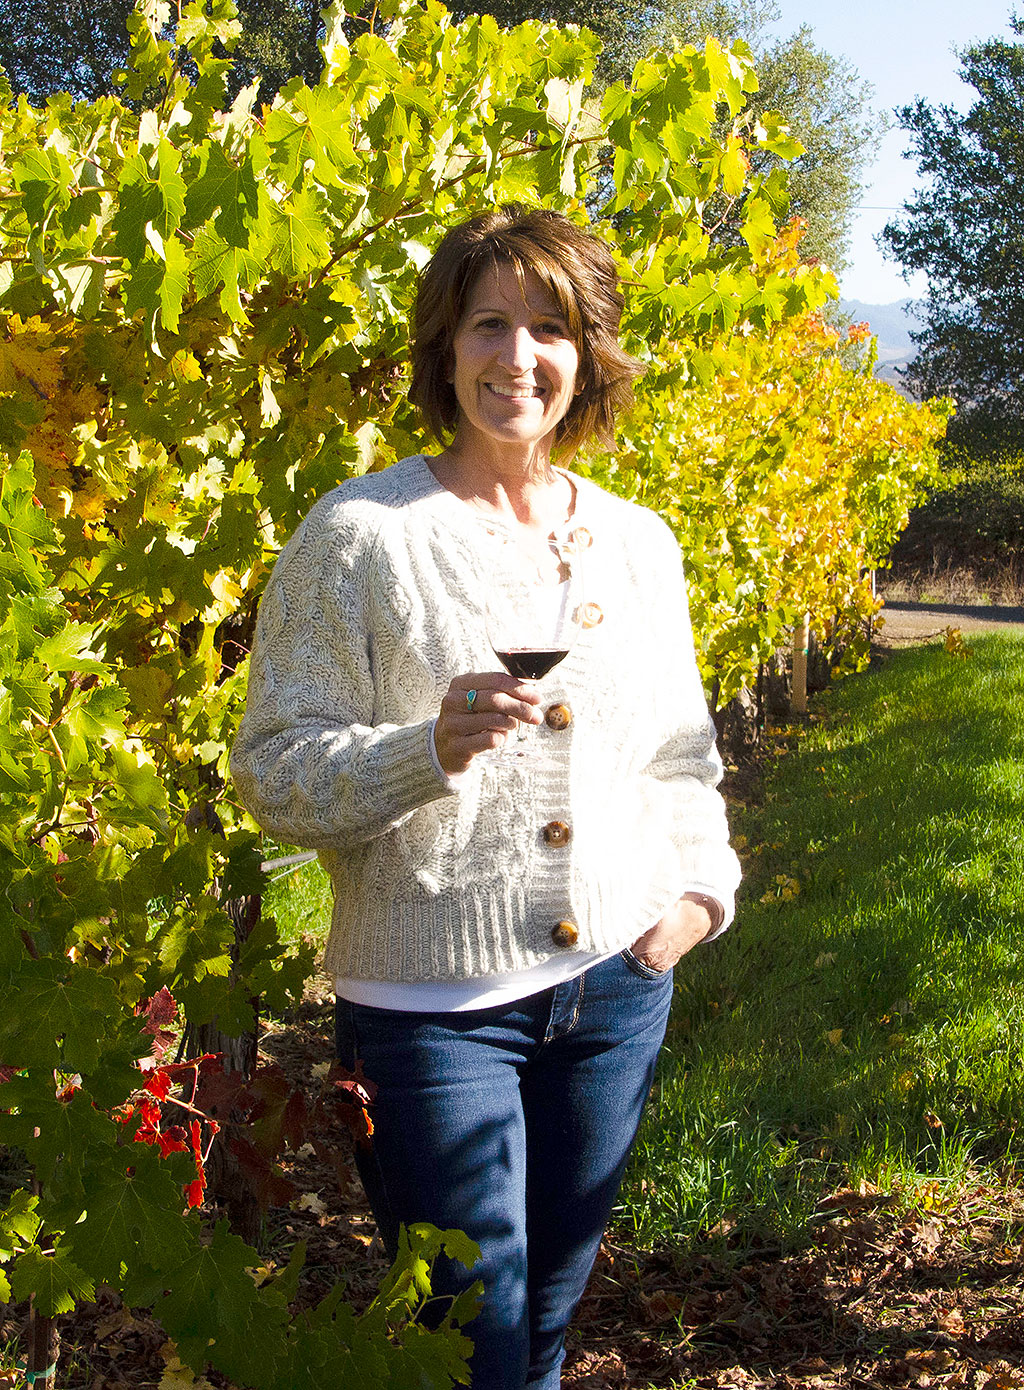 Woman holding a glass or red wine standing in a vineyard row